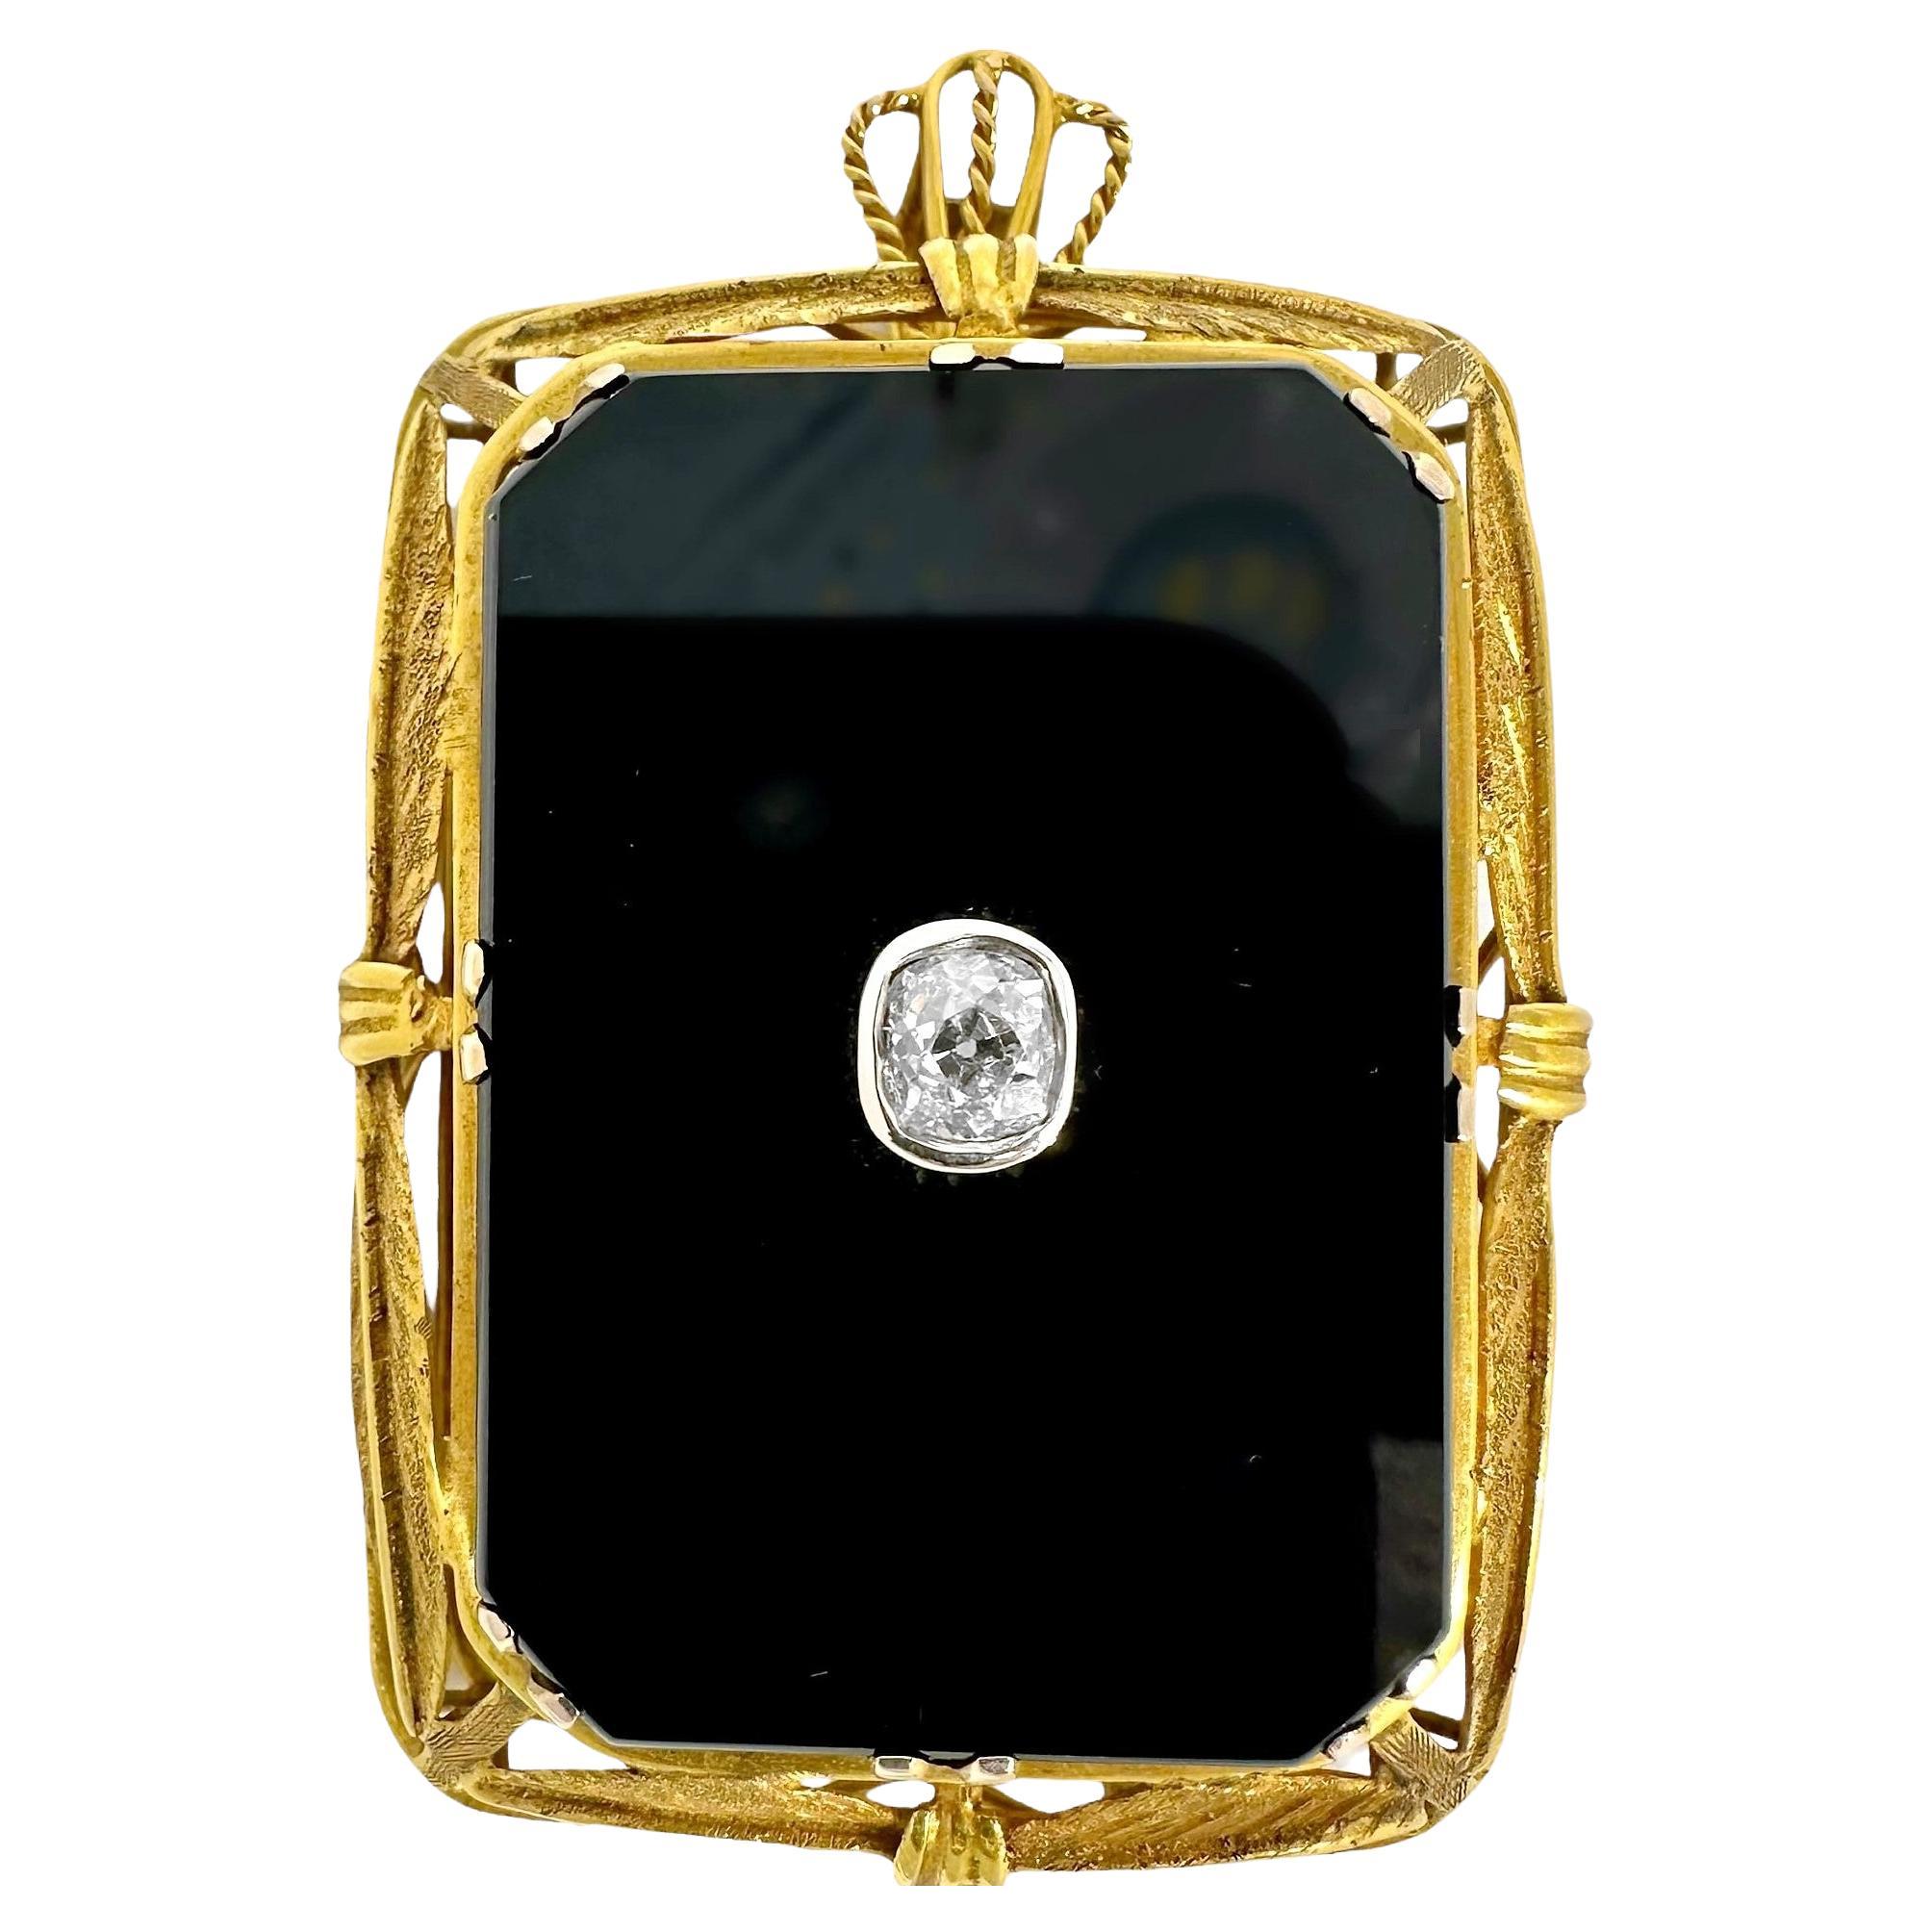 Arts & Crafts Period Large Scale 14k Gold Onyx and Diamond Pendant / Brooch